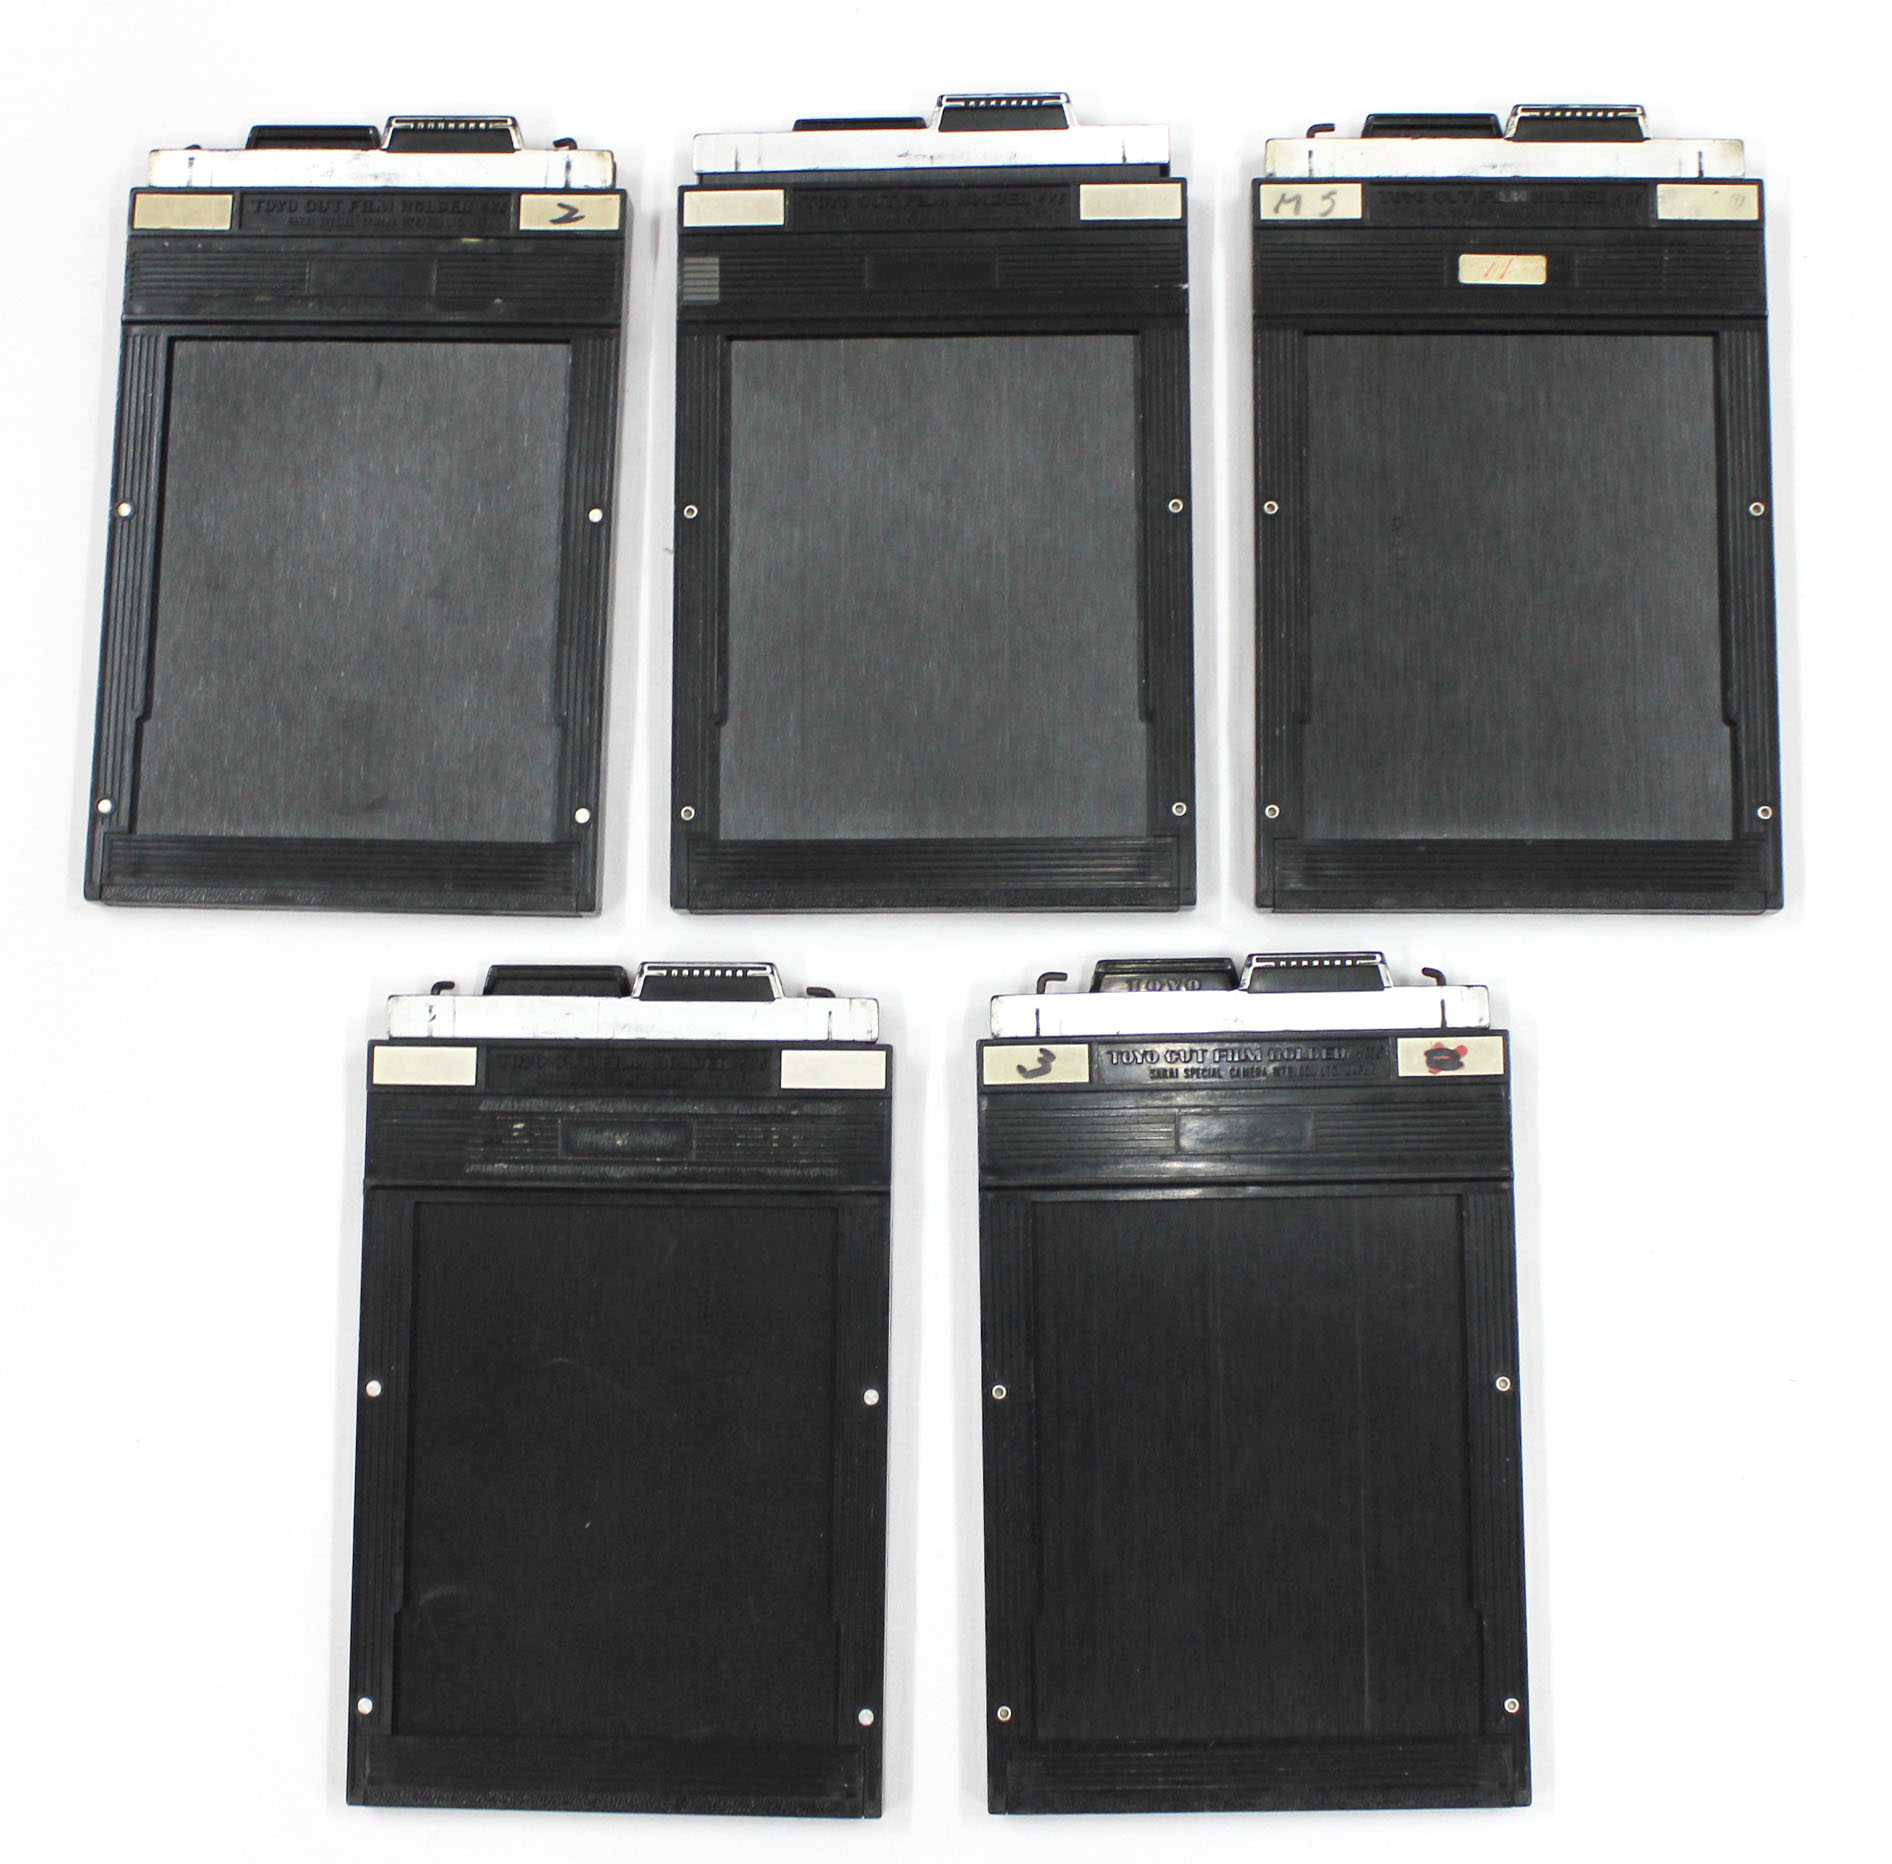 Toyo 4x5 Cut Film Holder Lot of 5 from Japan